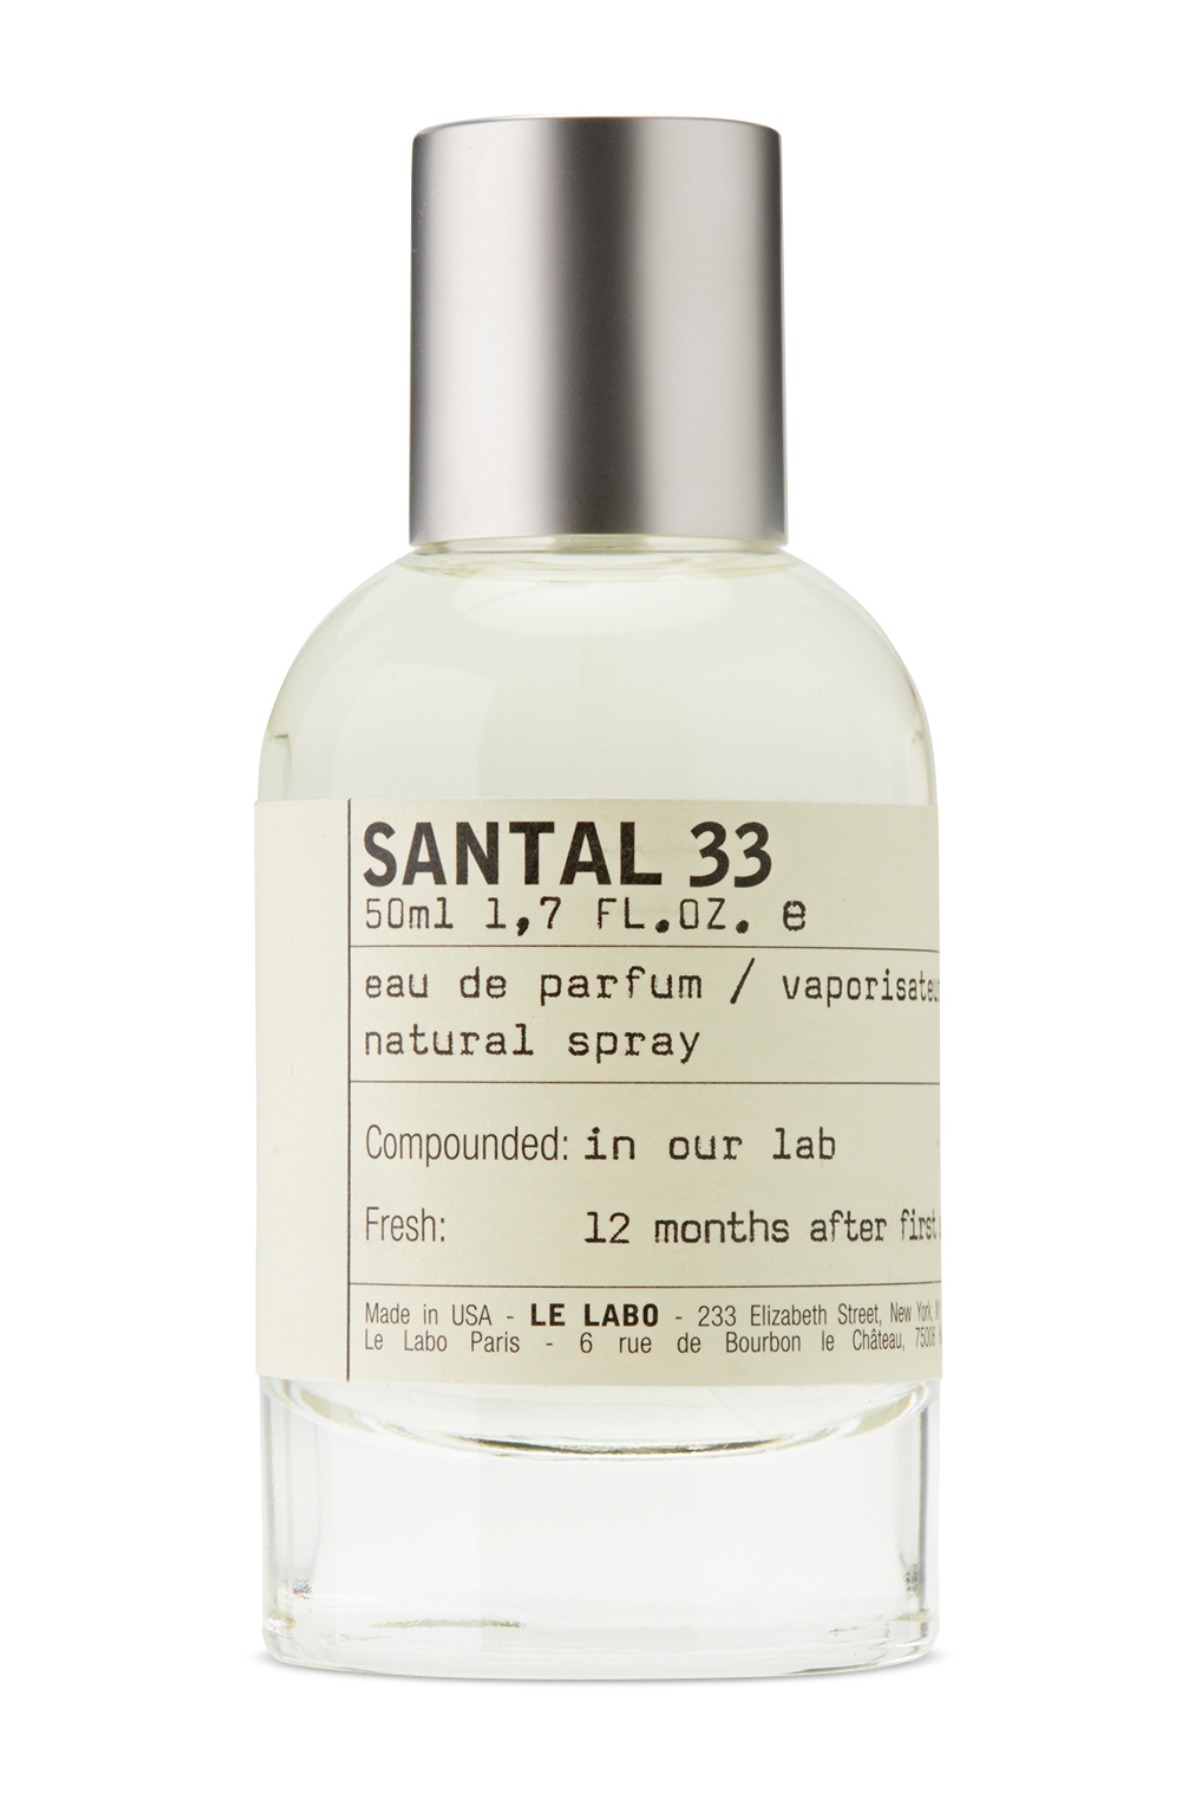 A bottle of Le Labo Santal 33 perfume against a white background.